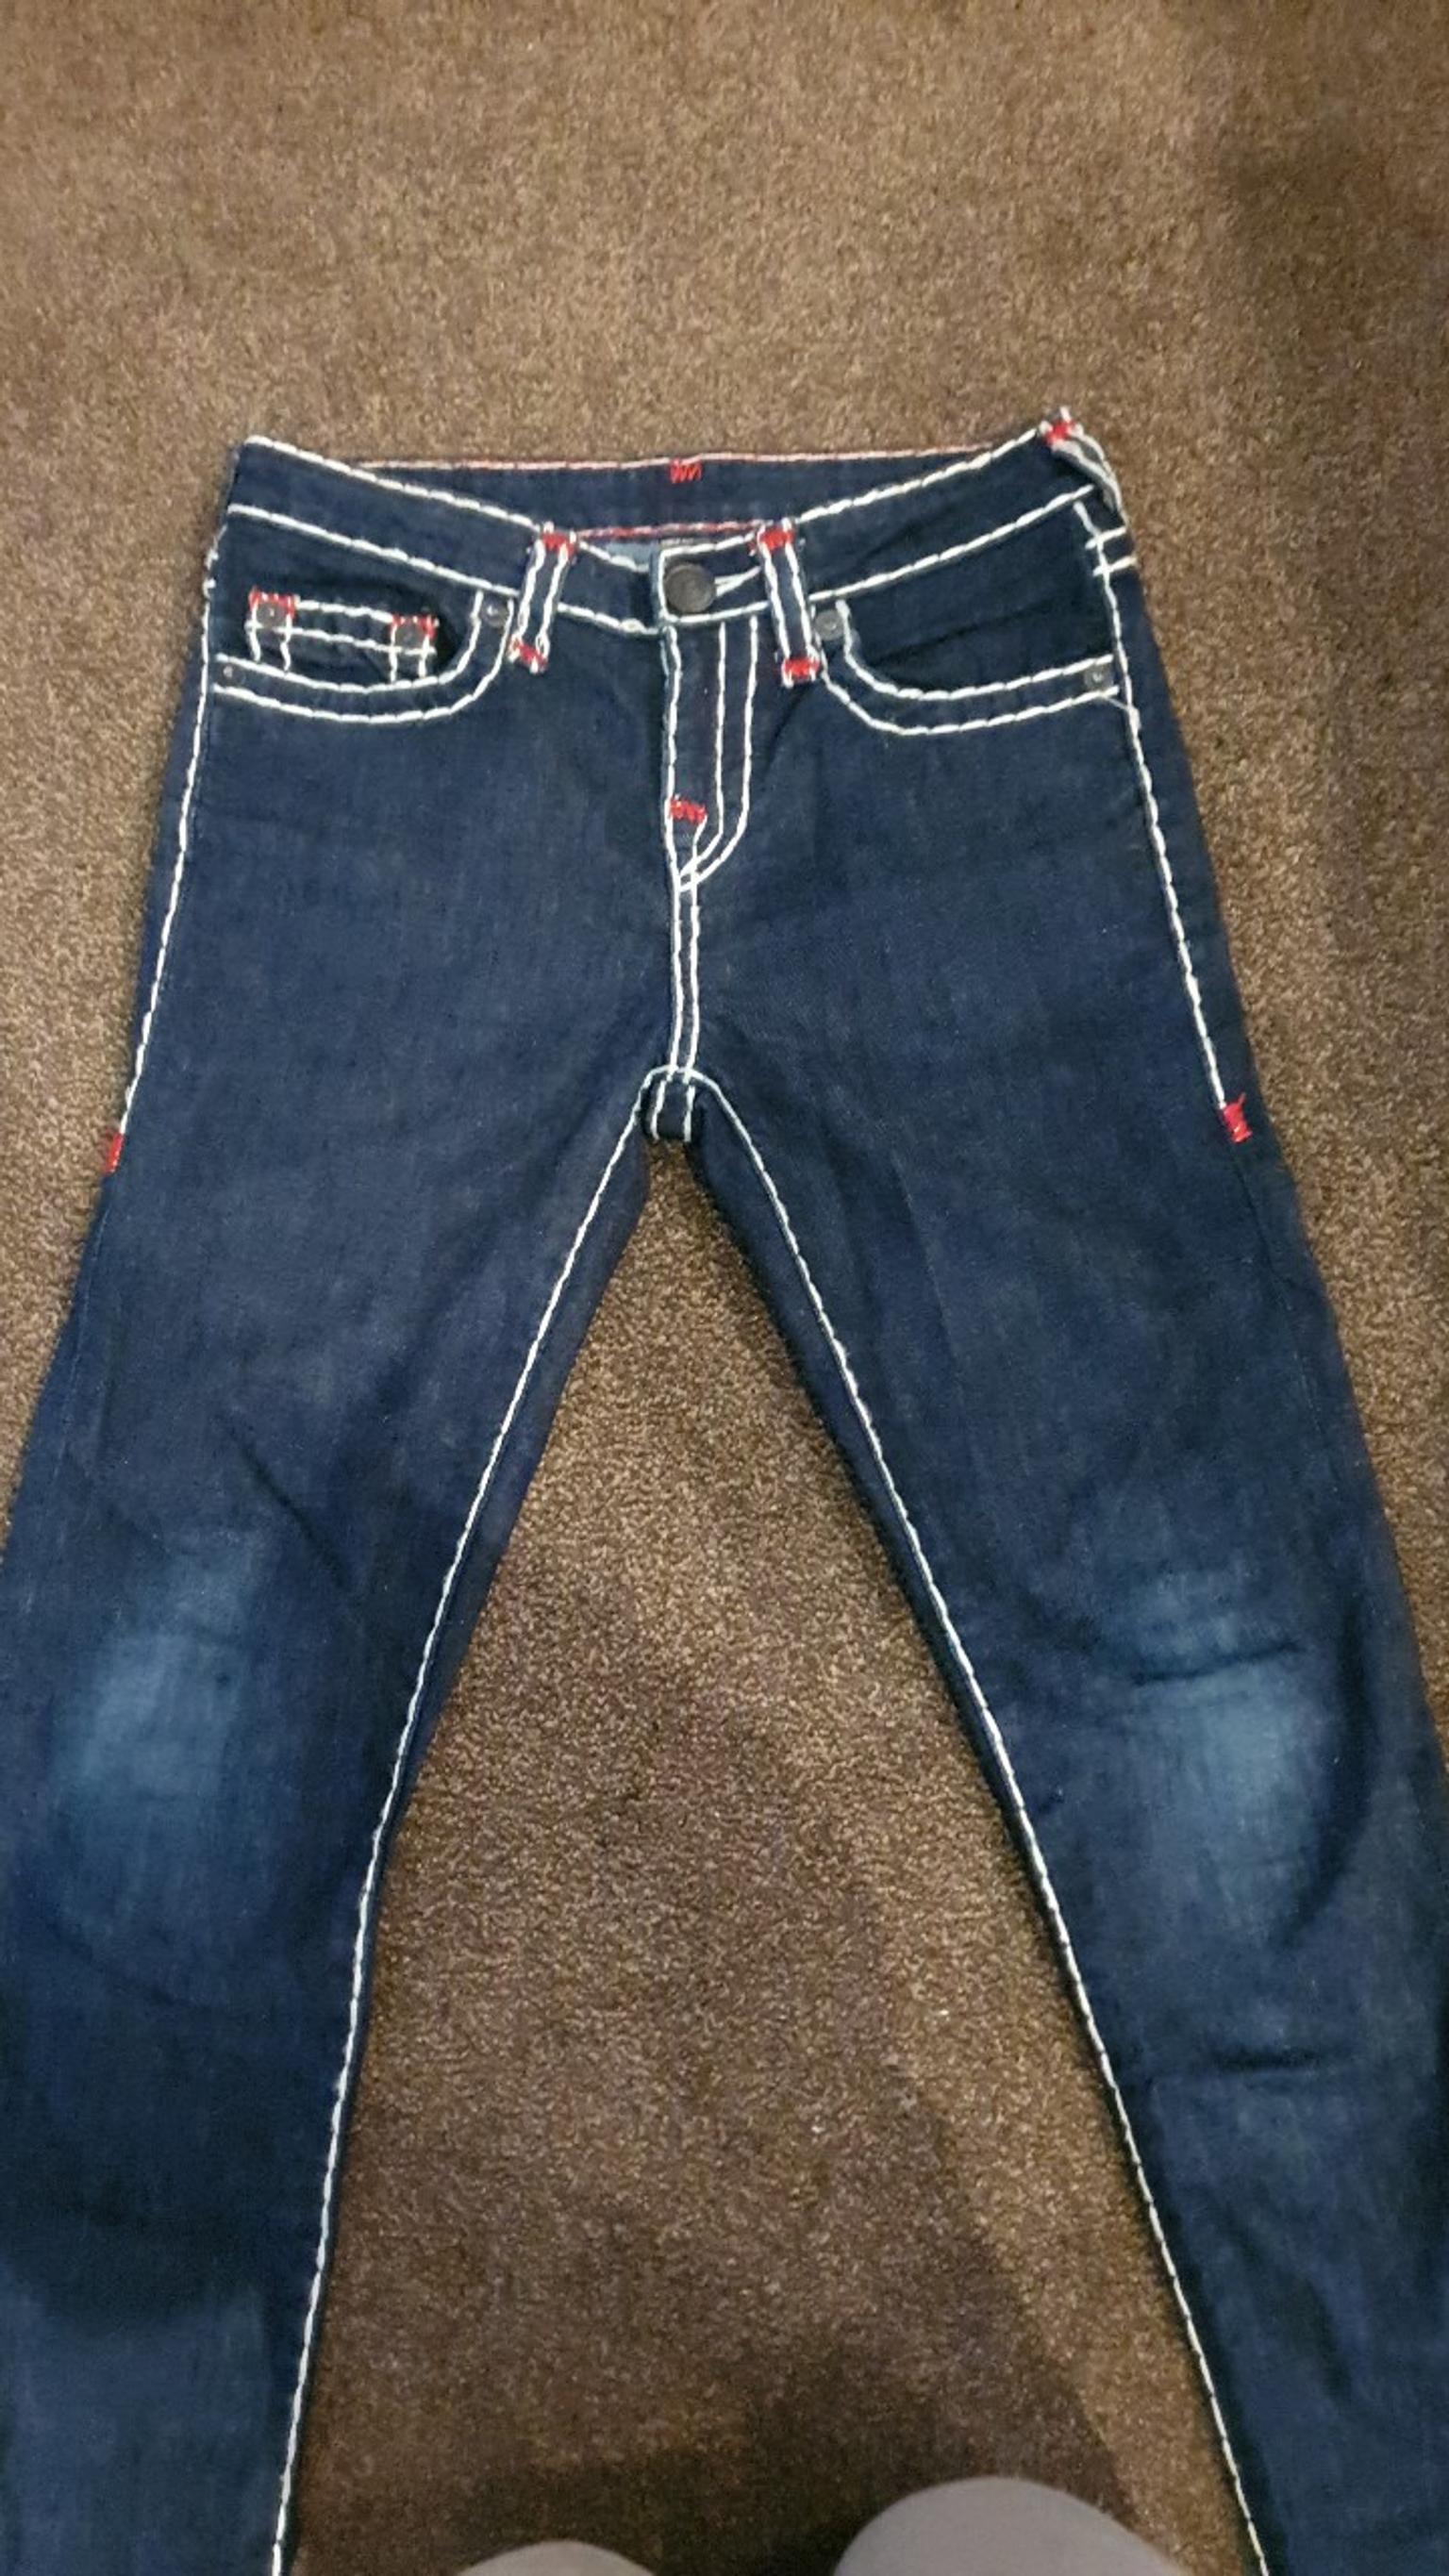 blue true religion jeans with white stitching